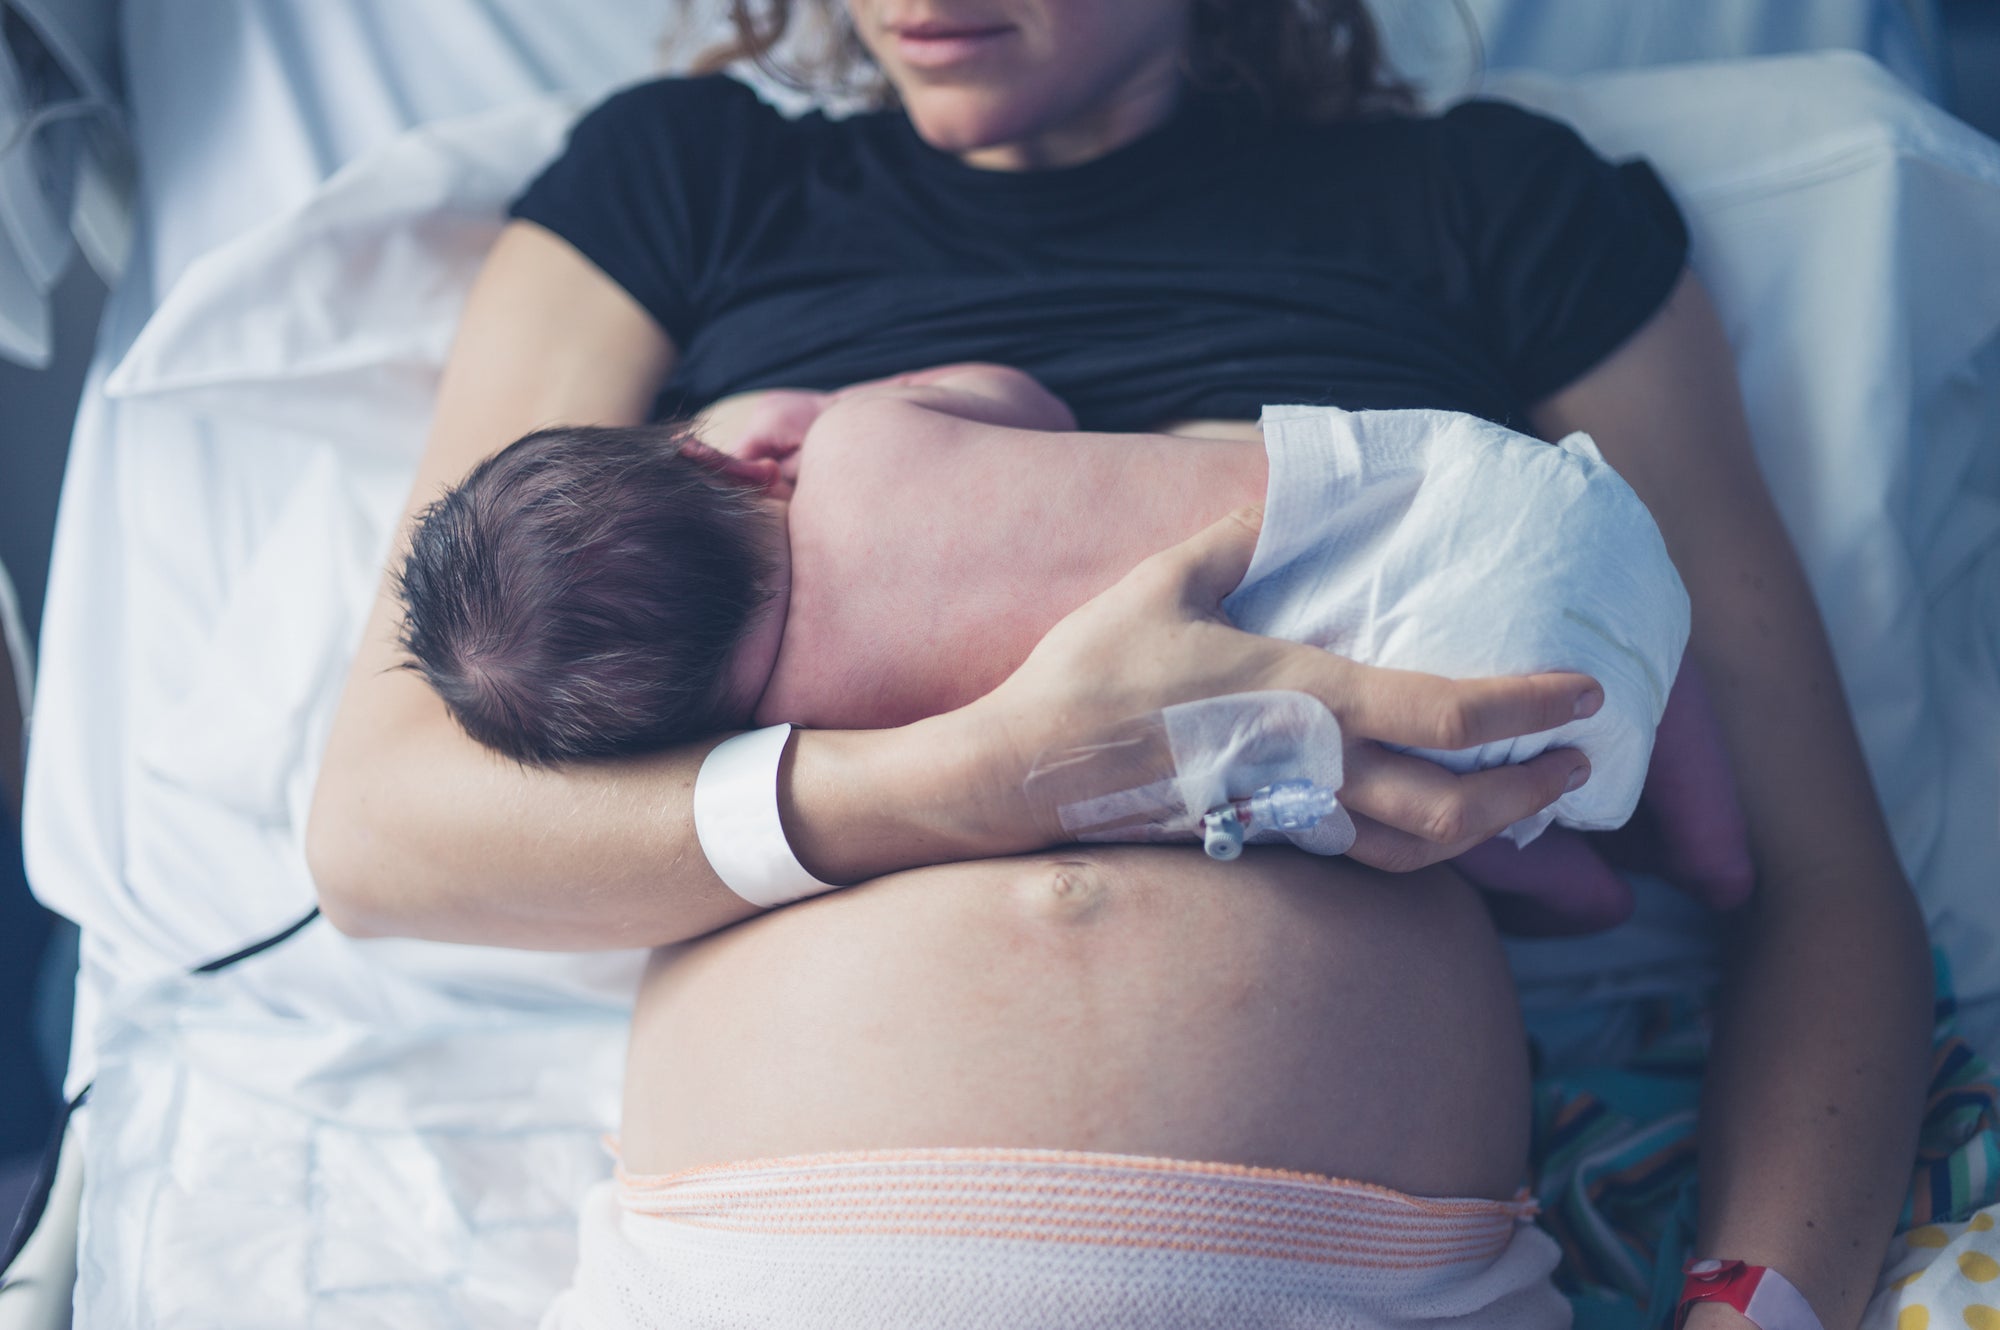 Labour + Birth Complications Explained